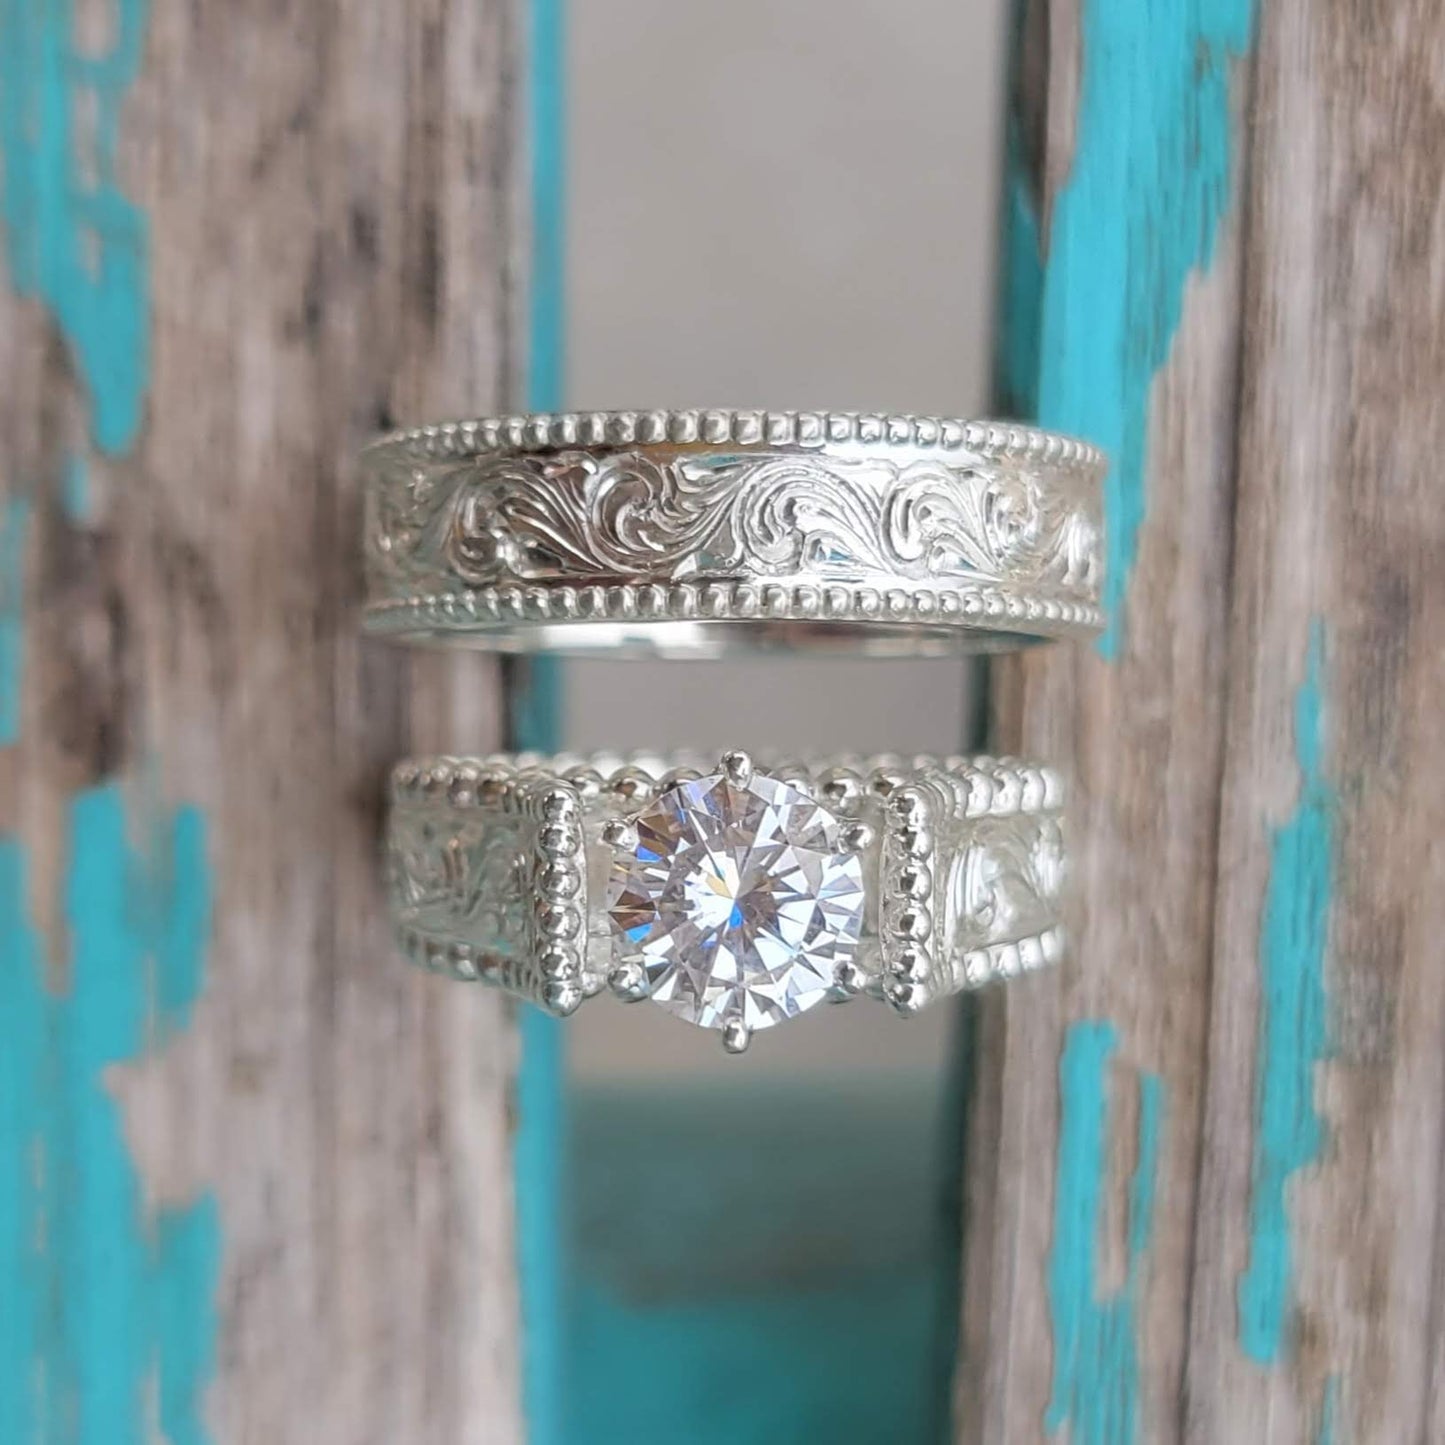 The Taylor Set: Western Wedding Band set, Western Engagement ring, Cowgirl wedding rings, sterling silver engagement ring